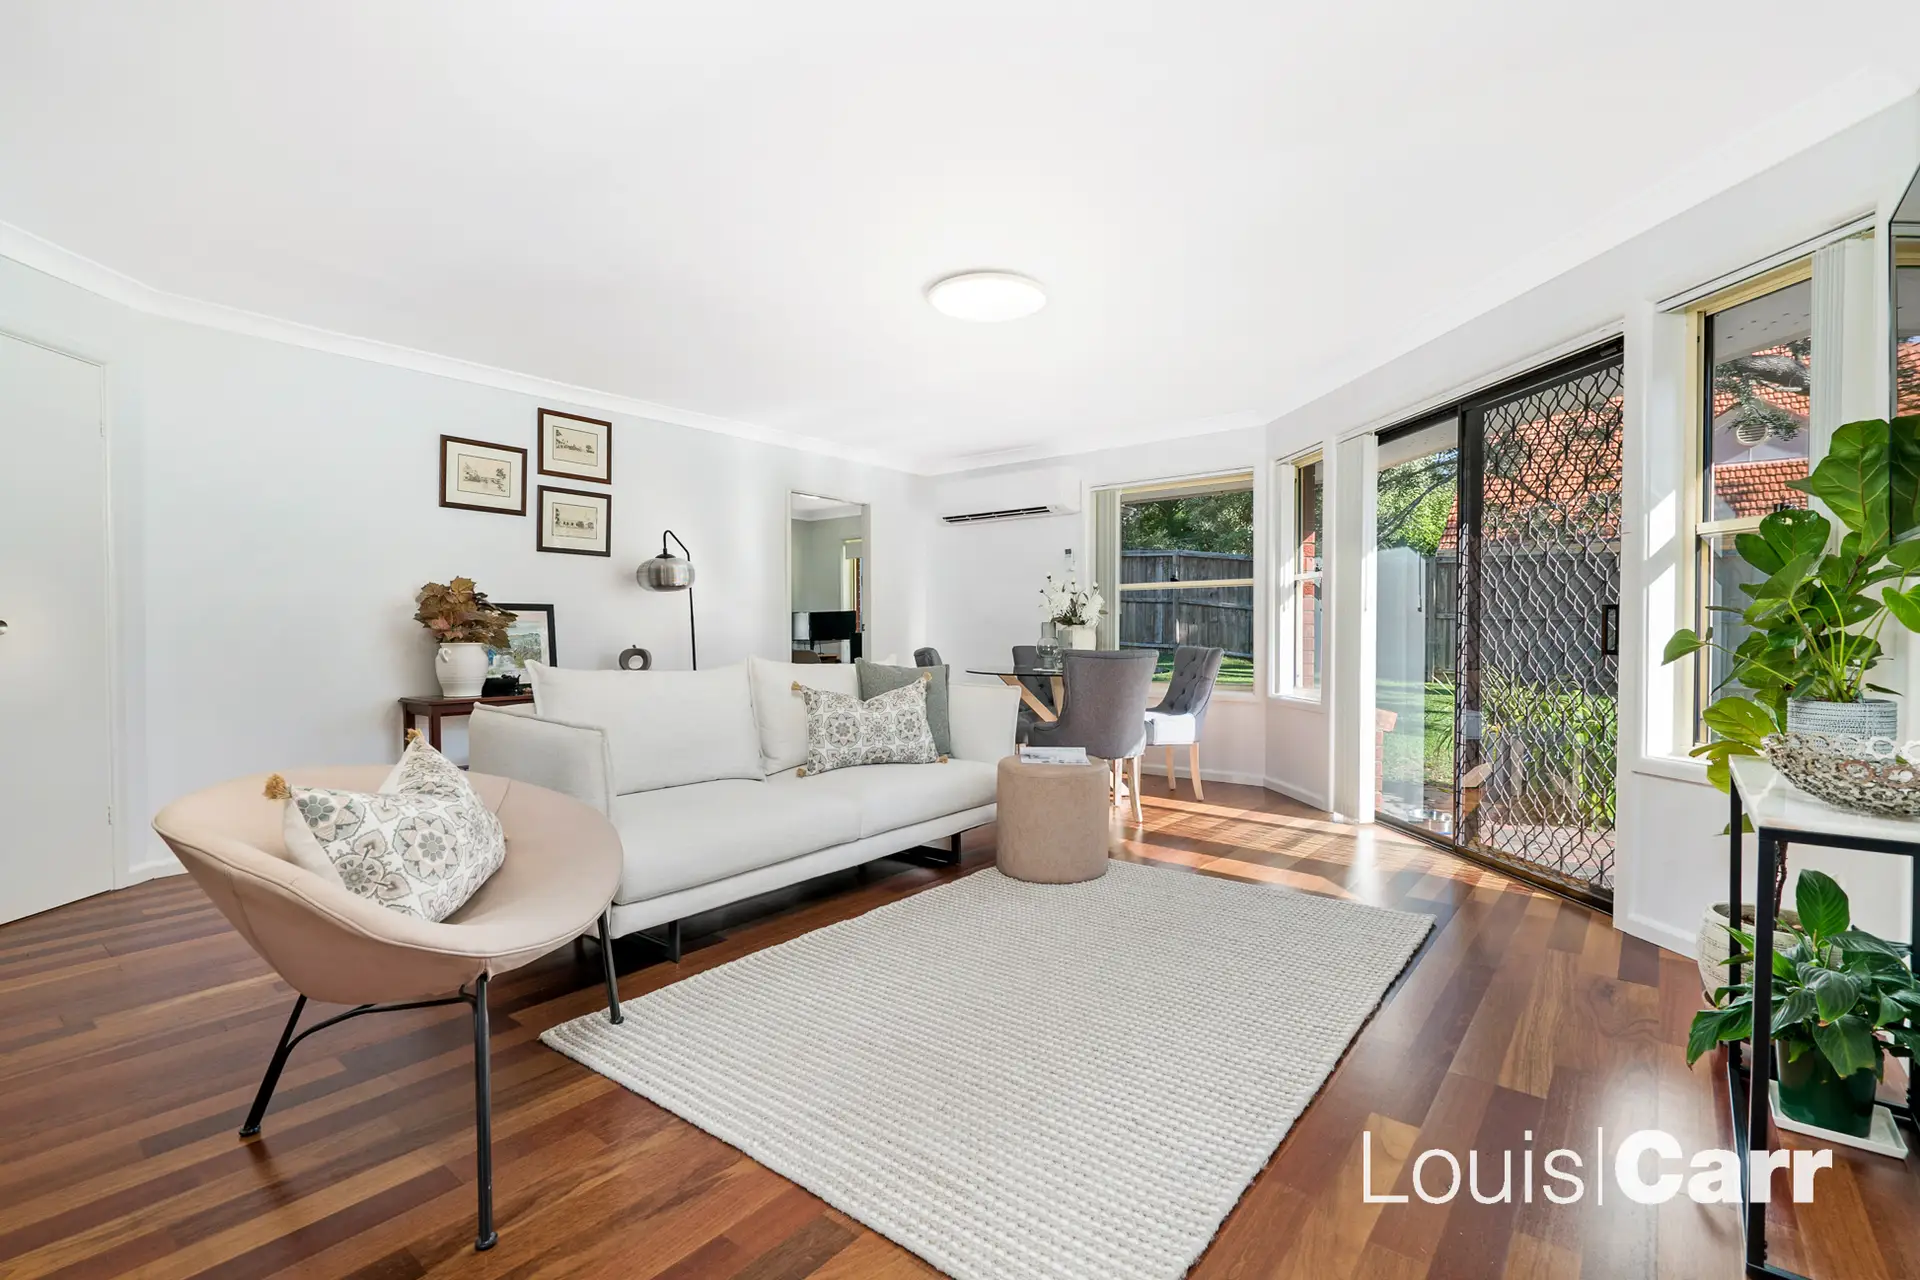 Photo #2: 17 Valda Street, West Pennant Hills - Sold by Louis Carr Real Estate